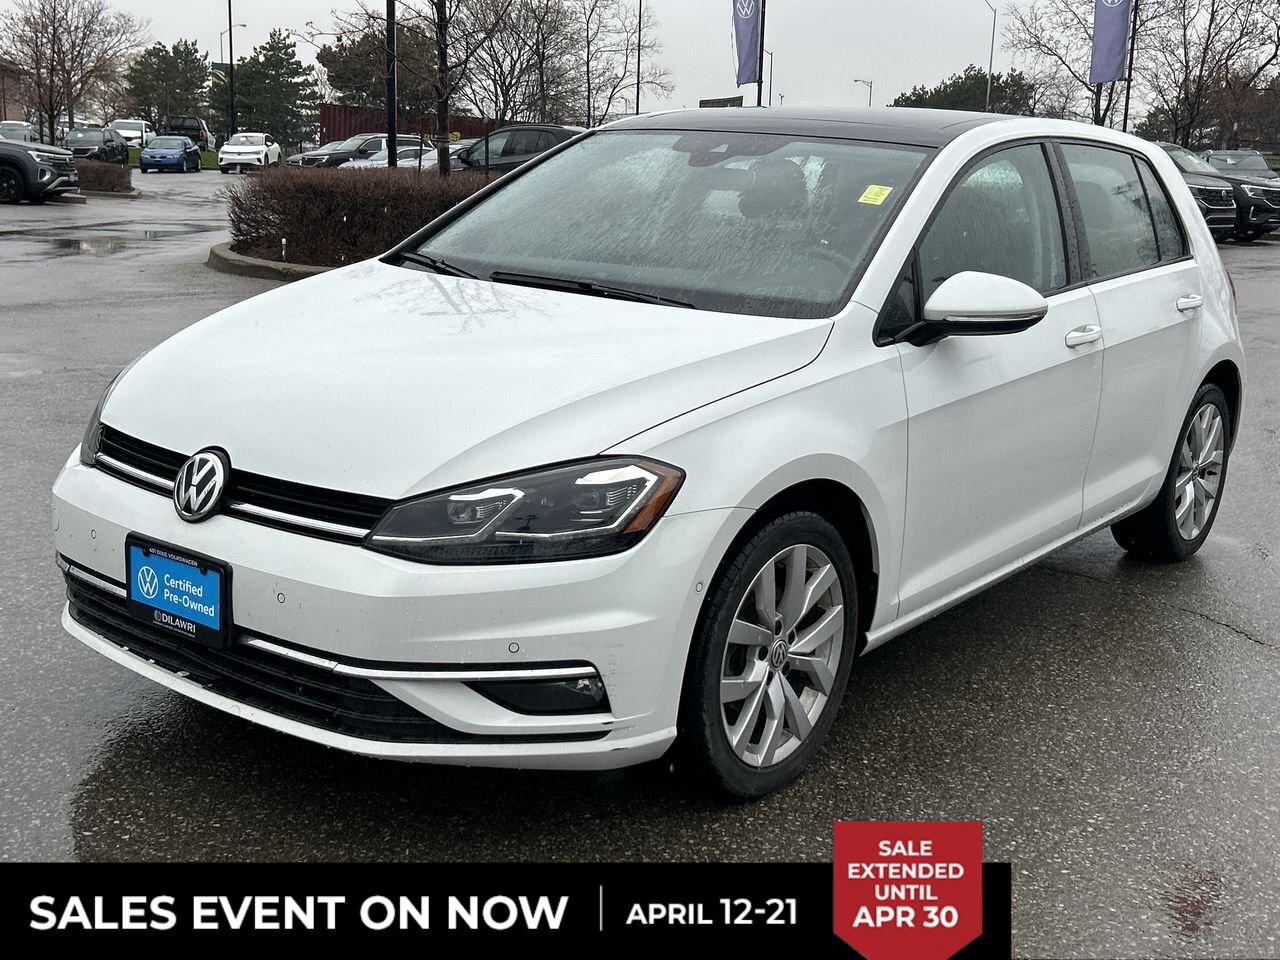 2019 Volkswagen Golf Execline Clean Carfax| Fully Loaded| Manual Transm